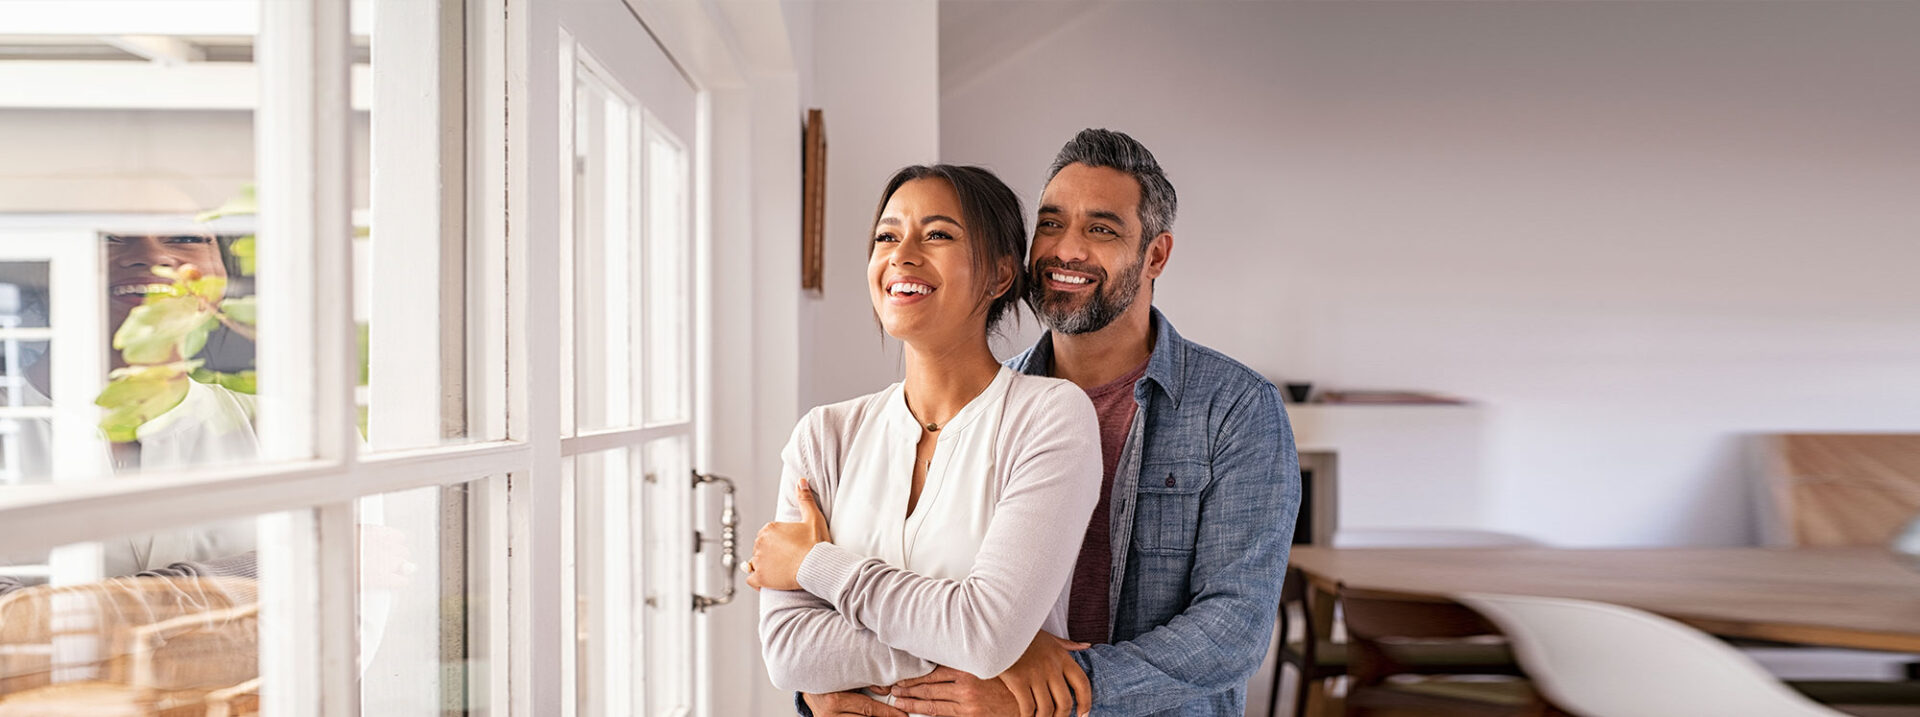 Smiling mid adult couple hugging each other and standing near window while looking outside. Happy and romantic mature man embracing hispanic wife from behind while standing at home with copy space. Future, vision and daydream concept.